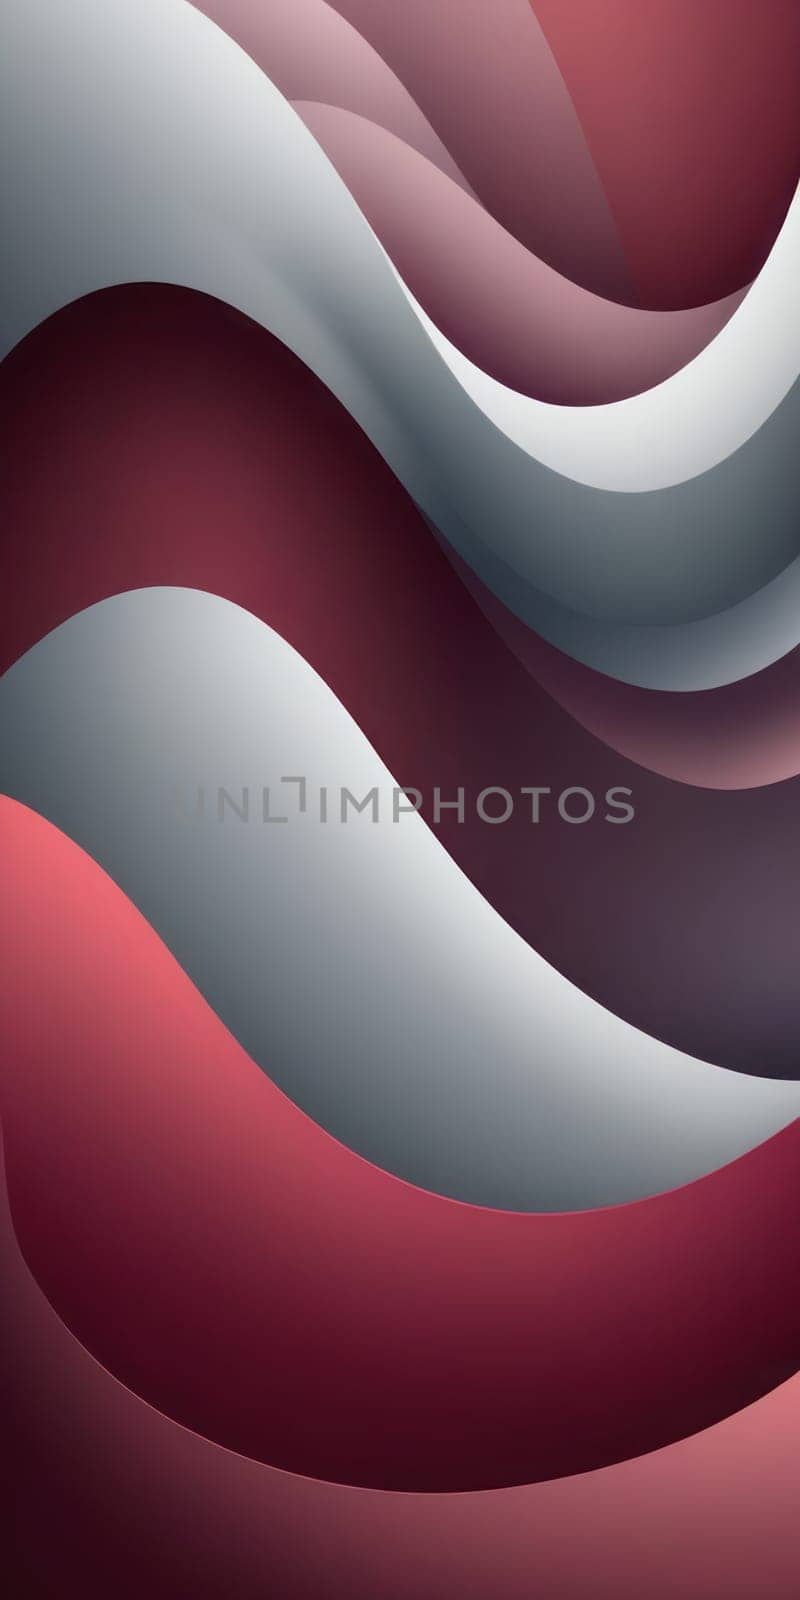 Helical Shapes in Maroon Lightslategray by nkotlyar